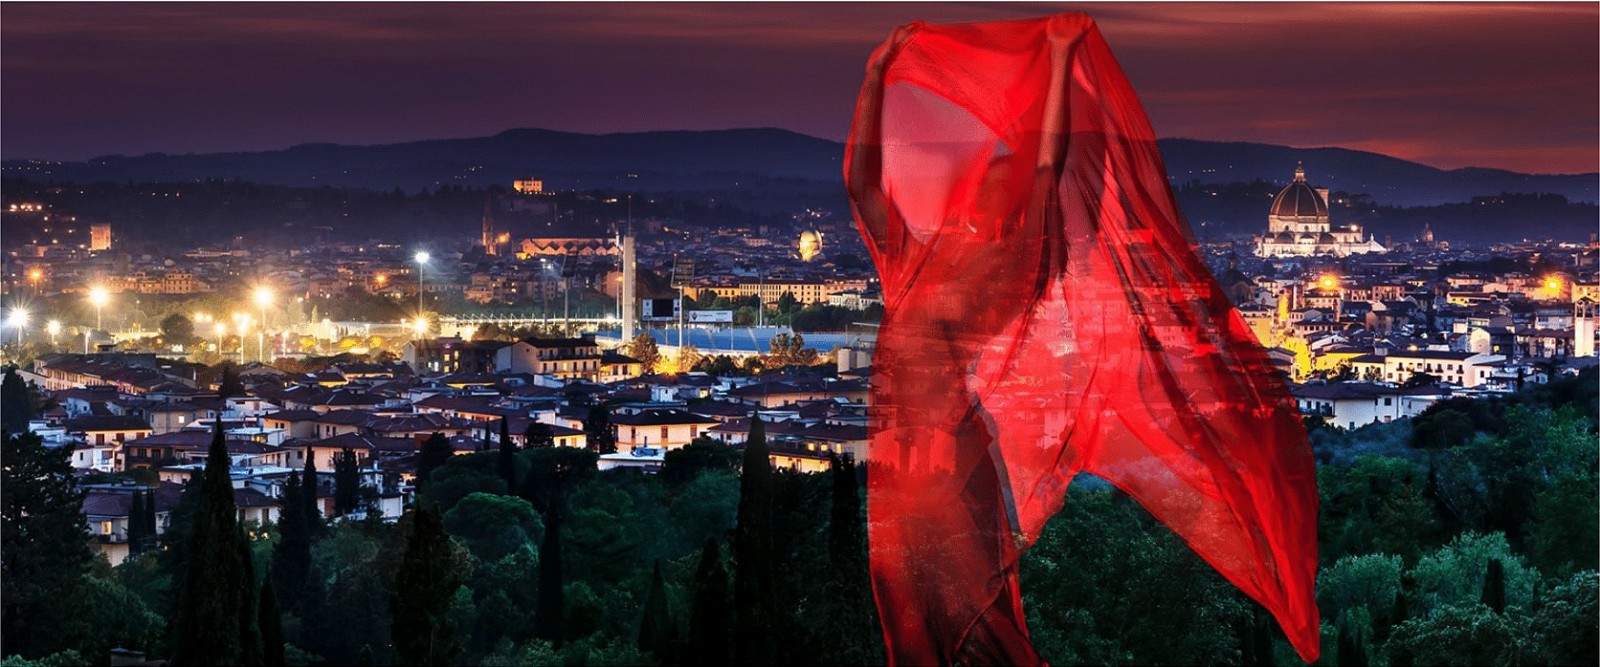 David Drebin, Fantasy in Florence, 2019
40 x 96 and 30 x 72 inches